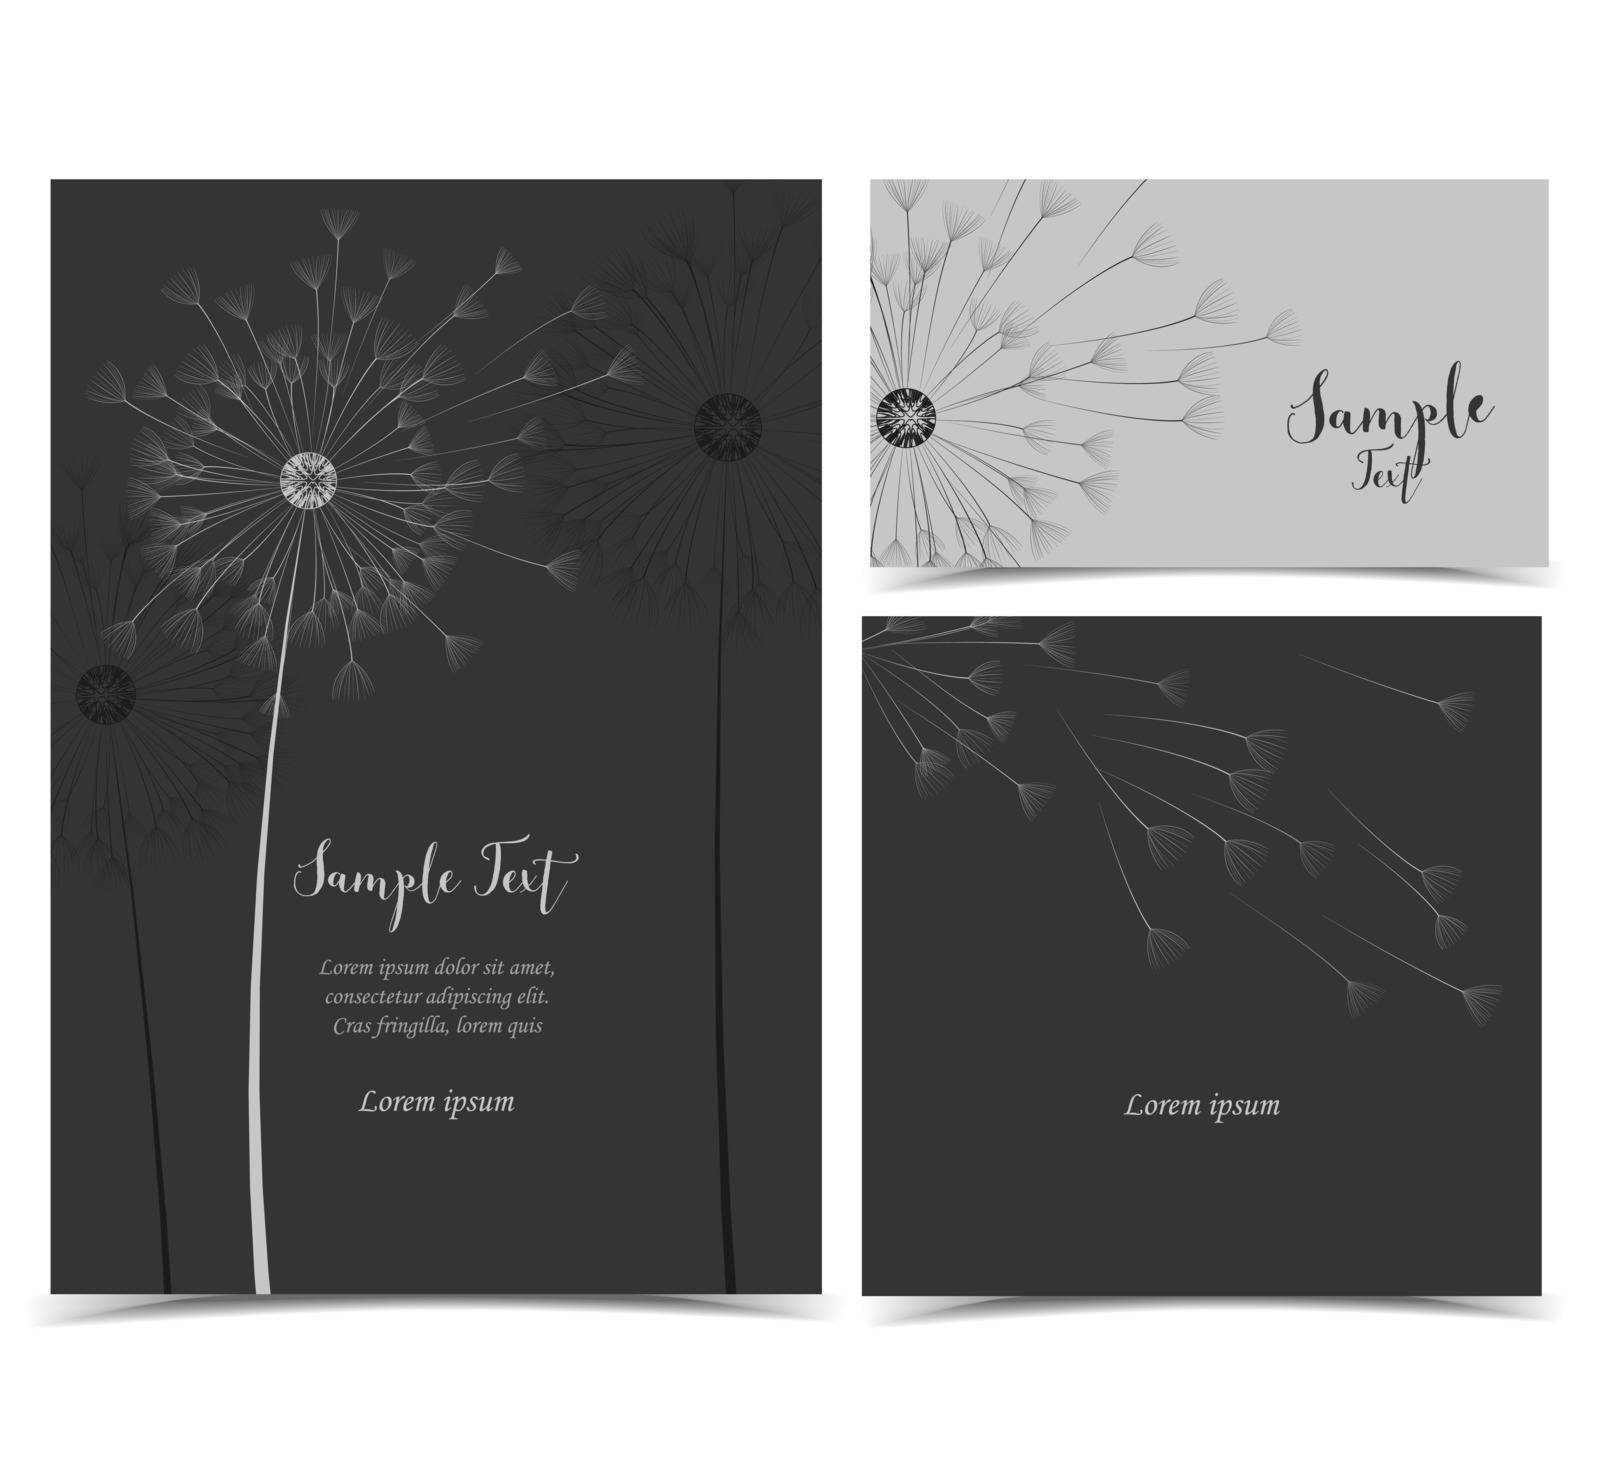 Vector illustration of dandelion flower. Dark background with flowers with place for text. Set of greeting cards